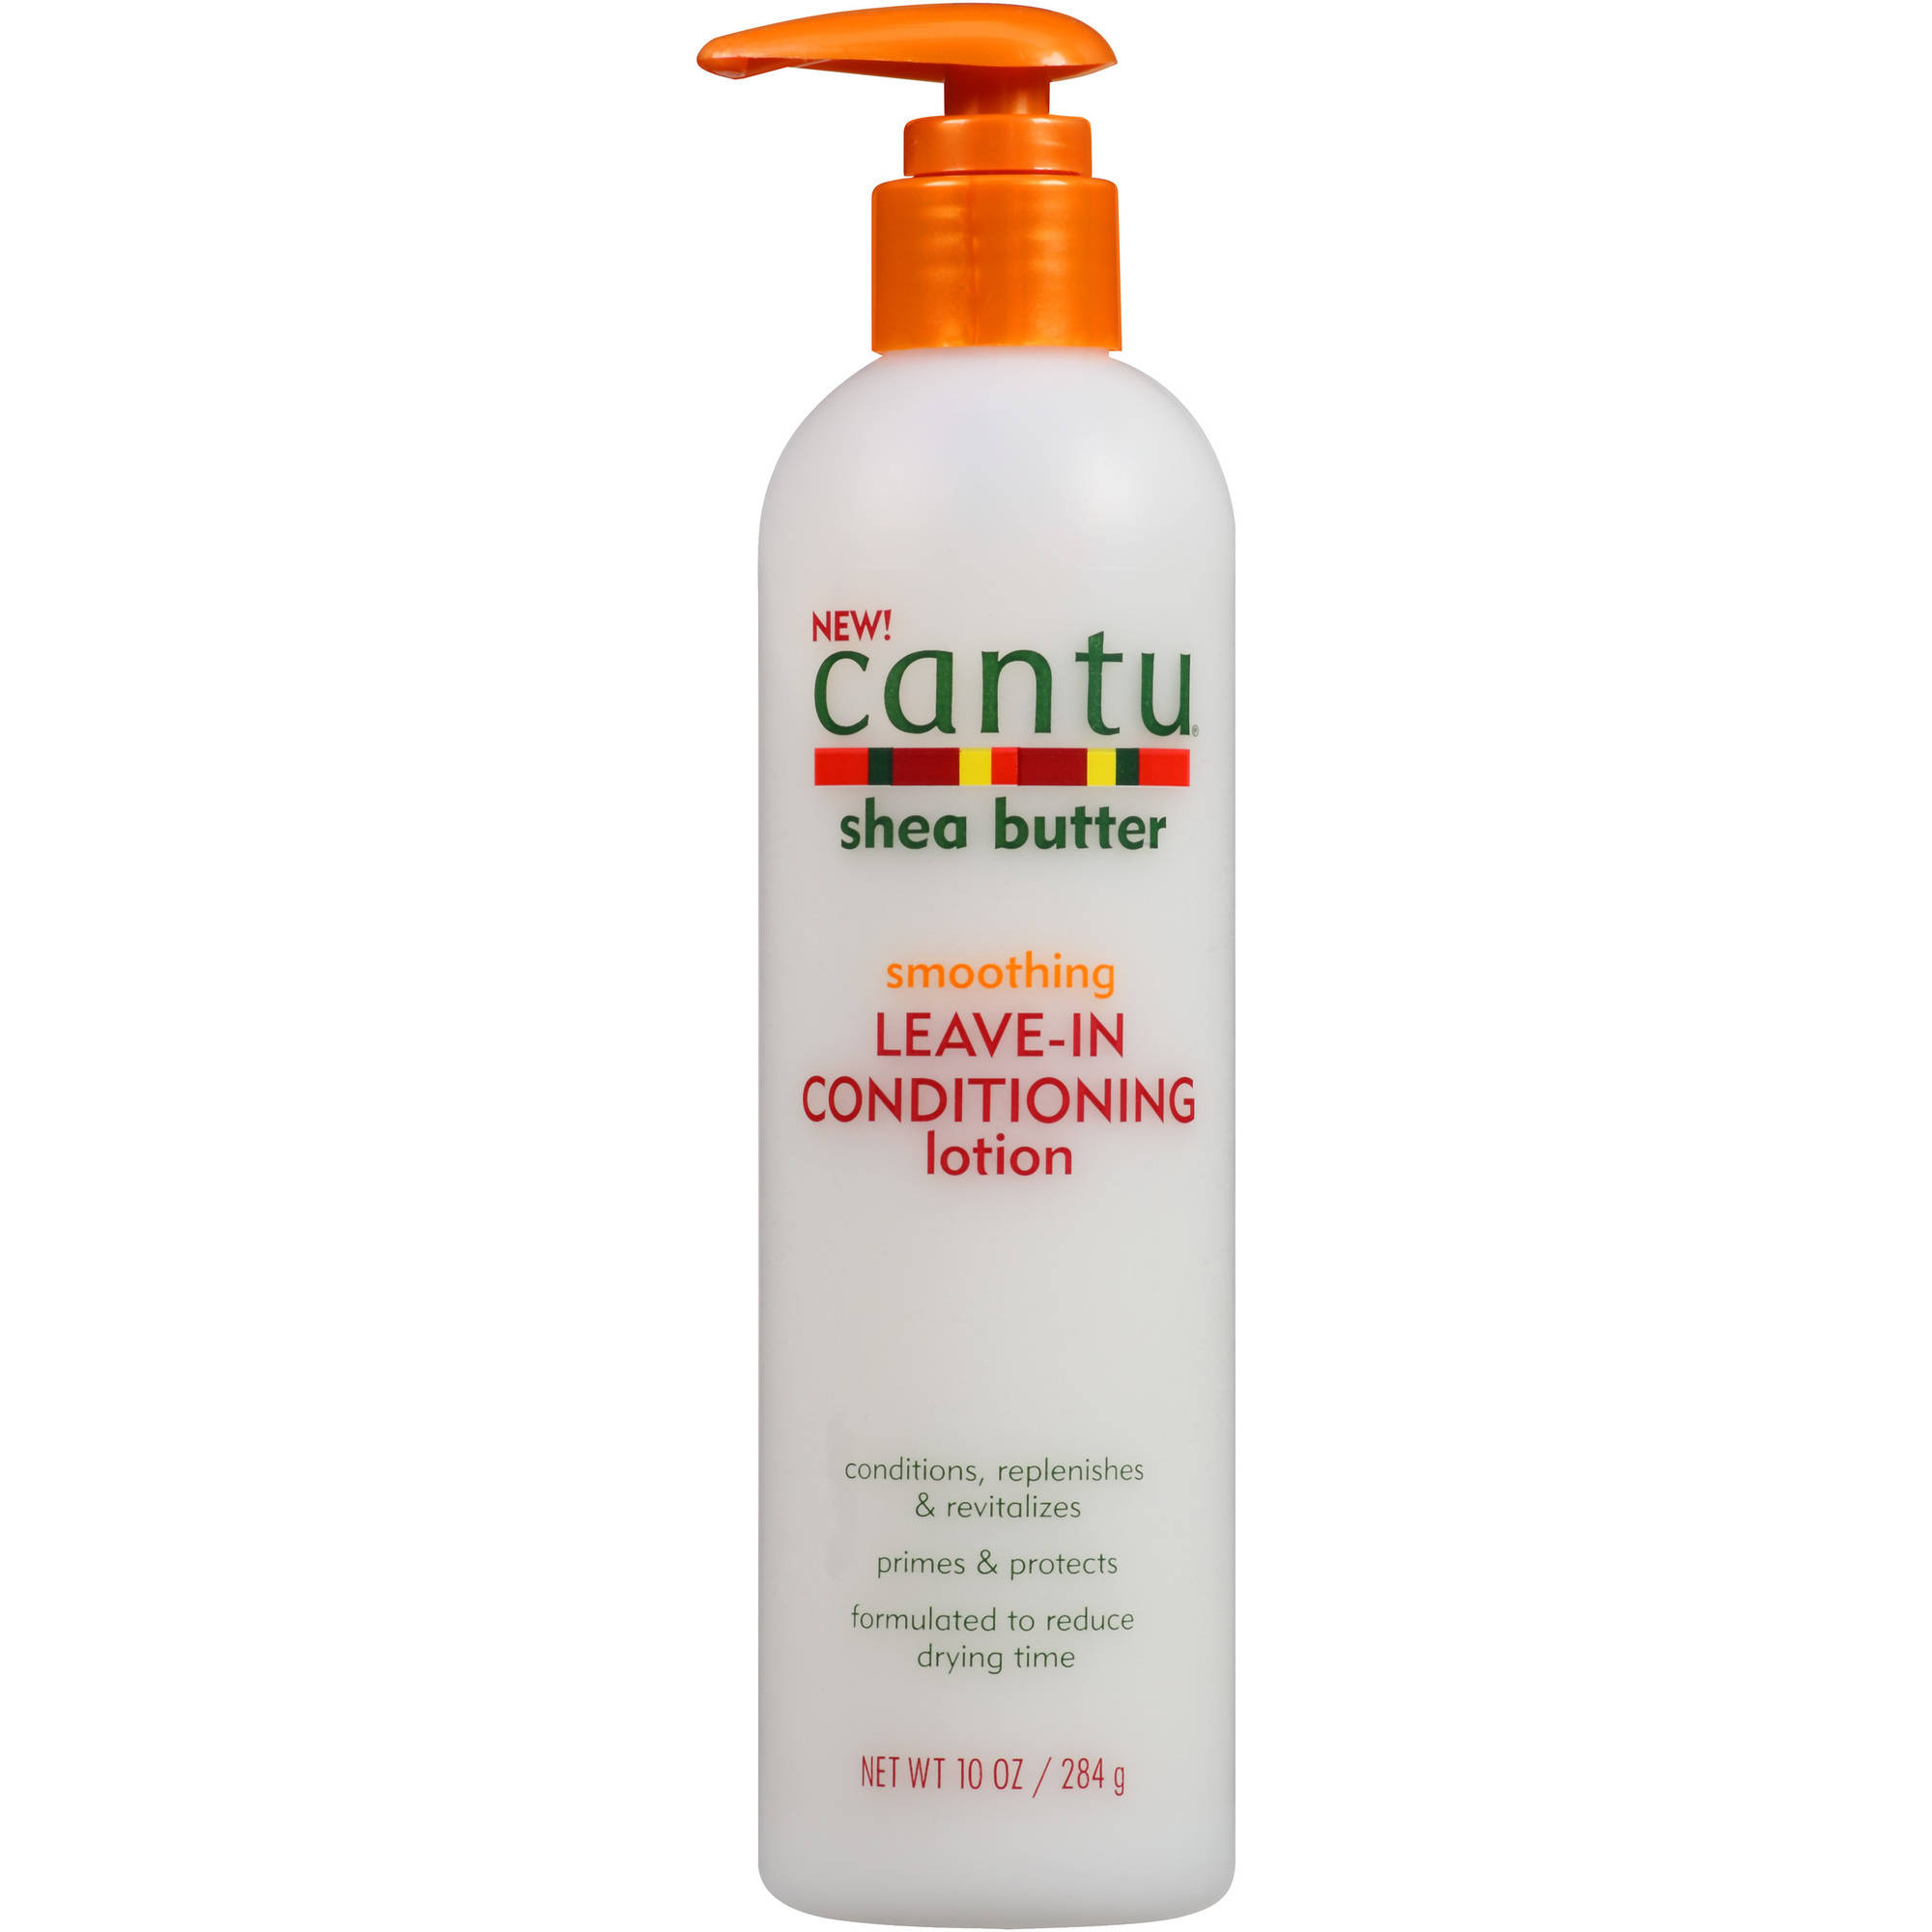 Bilderesultat for cantu smoothing leave-in conditioning lotion